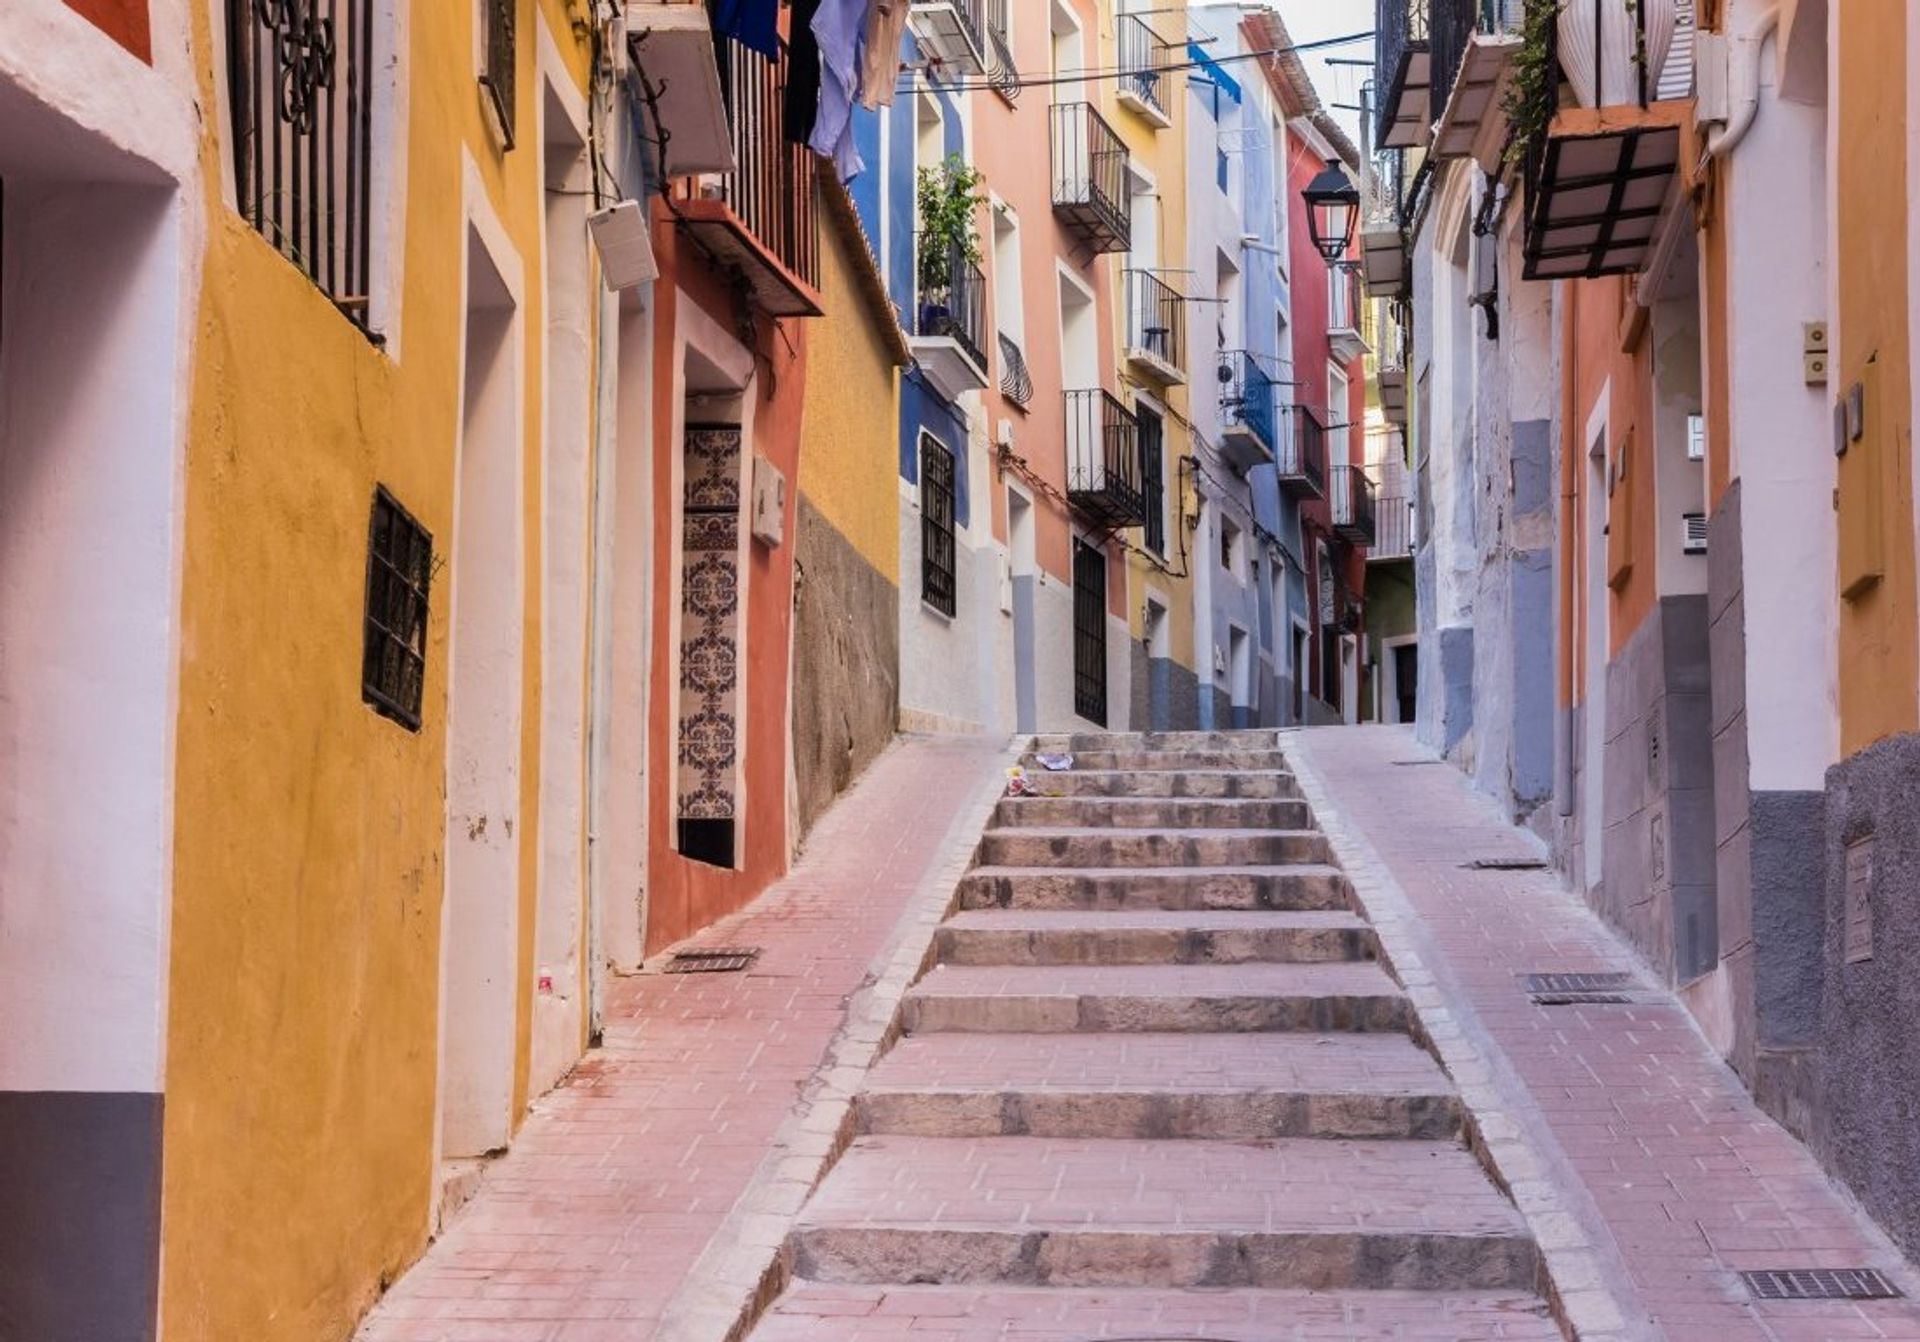 Villajoyosa is a town full of character and colour, just 35 minutes from lively Alicante city